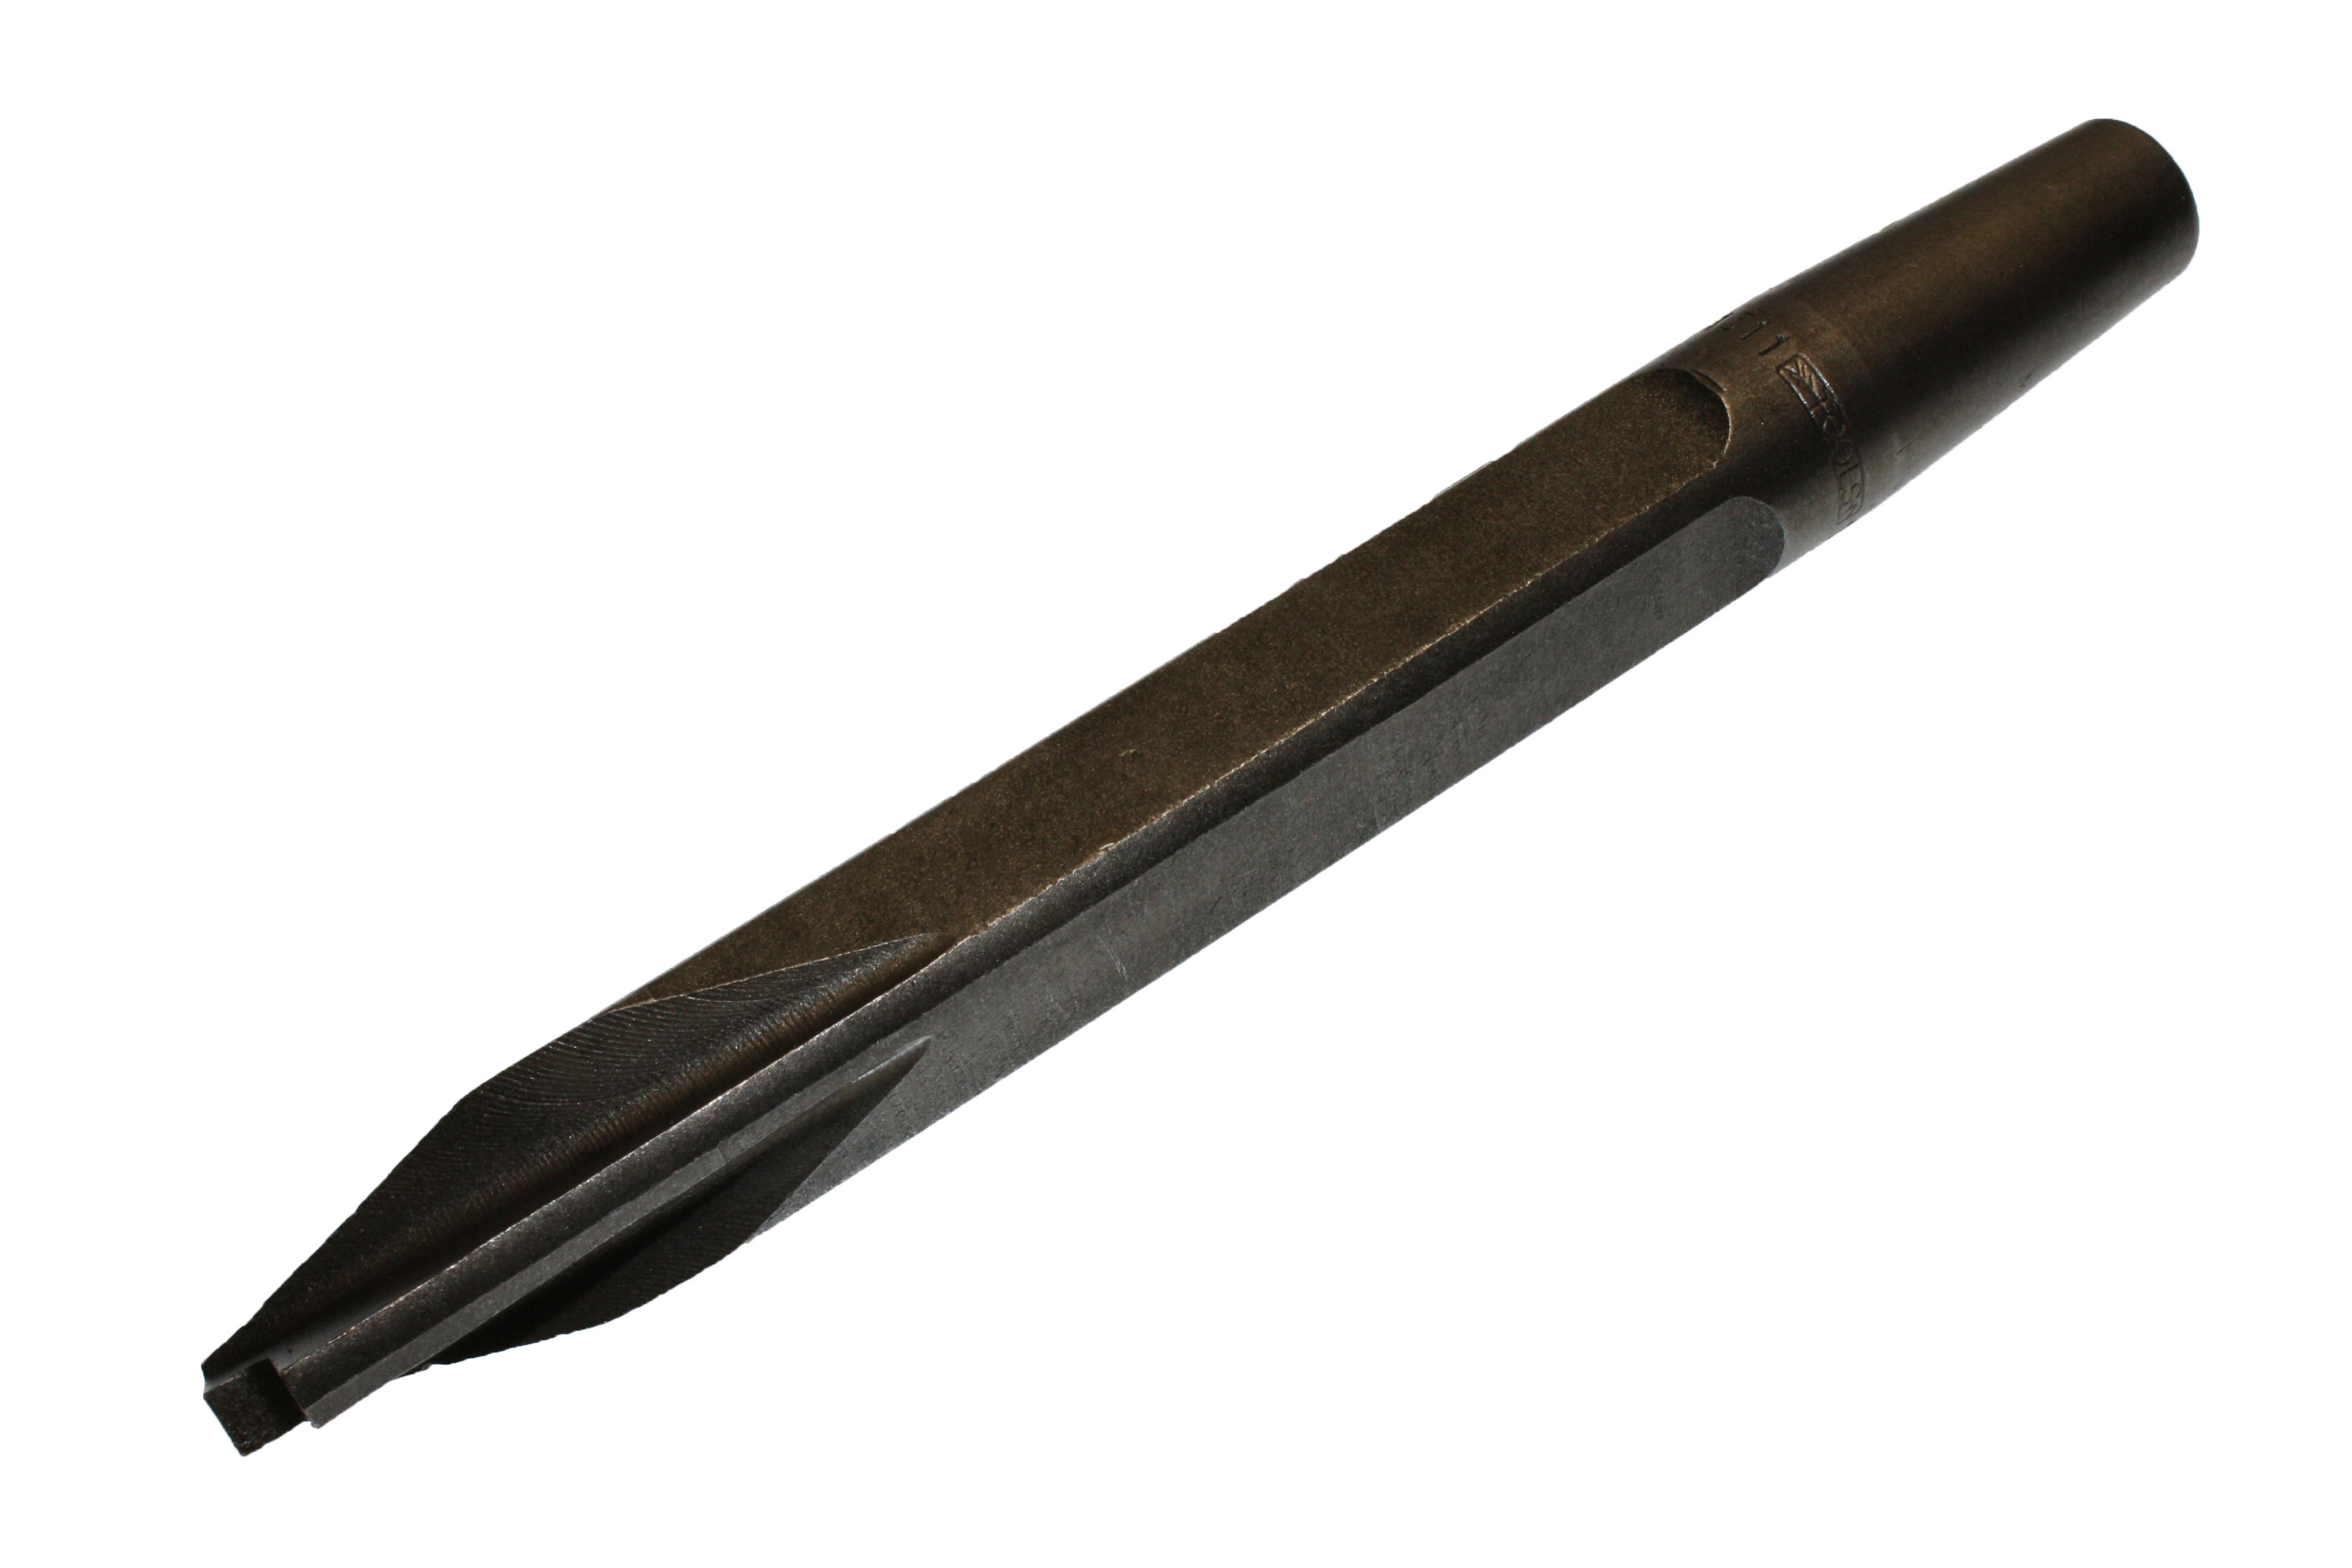 Ripper Chisel, Rivet Buster, 9 Inch Size